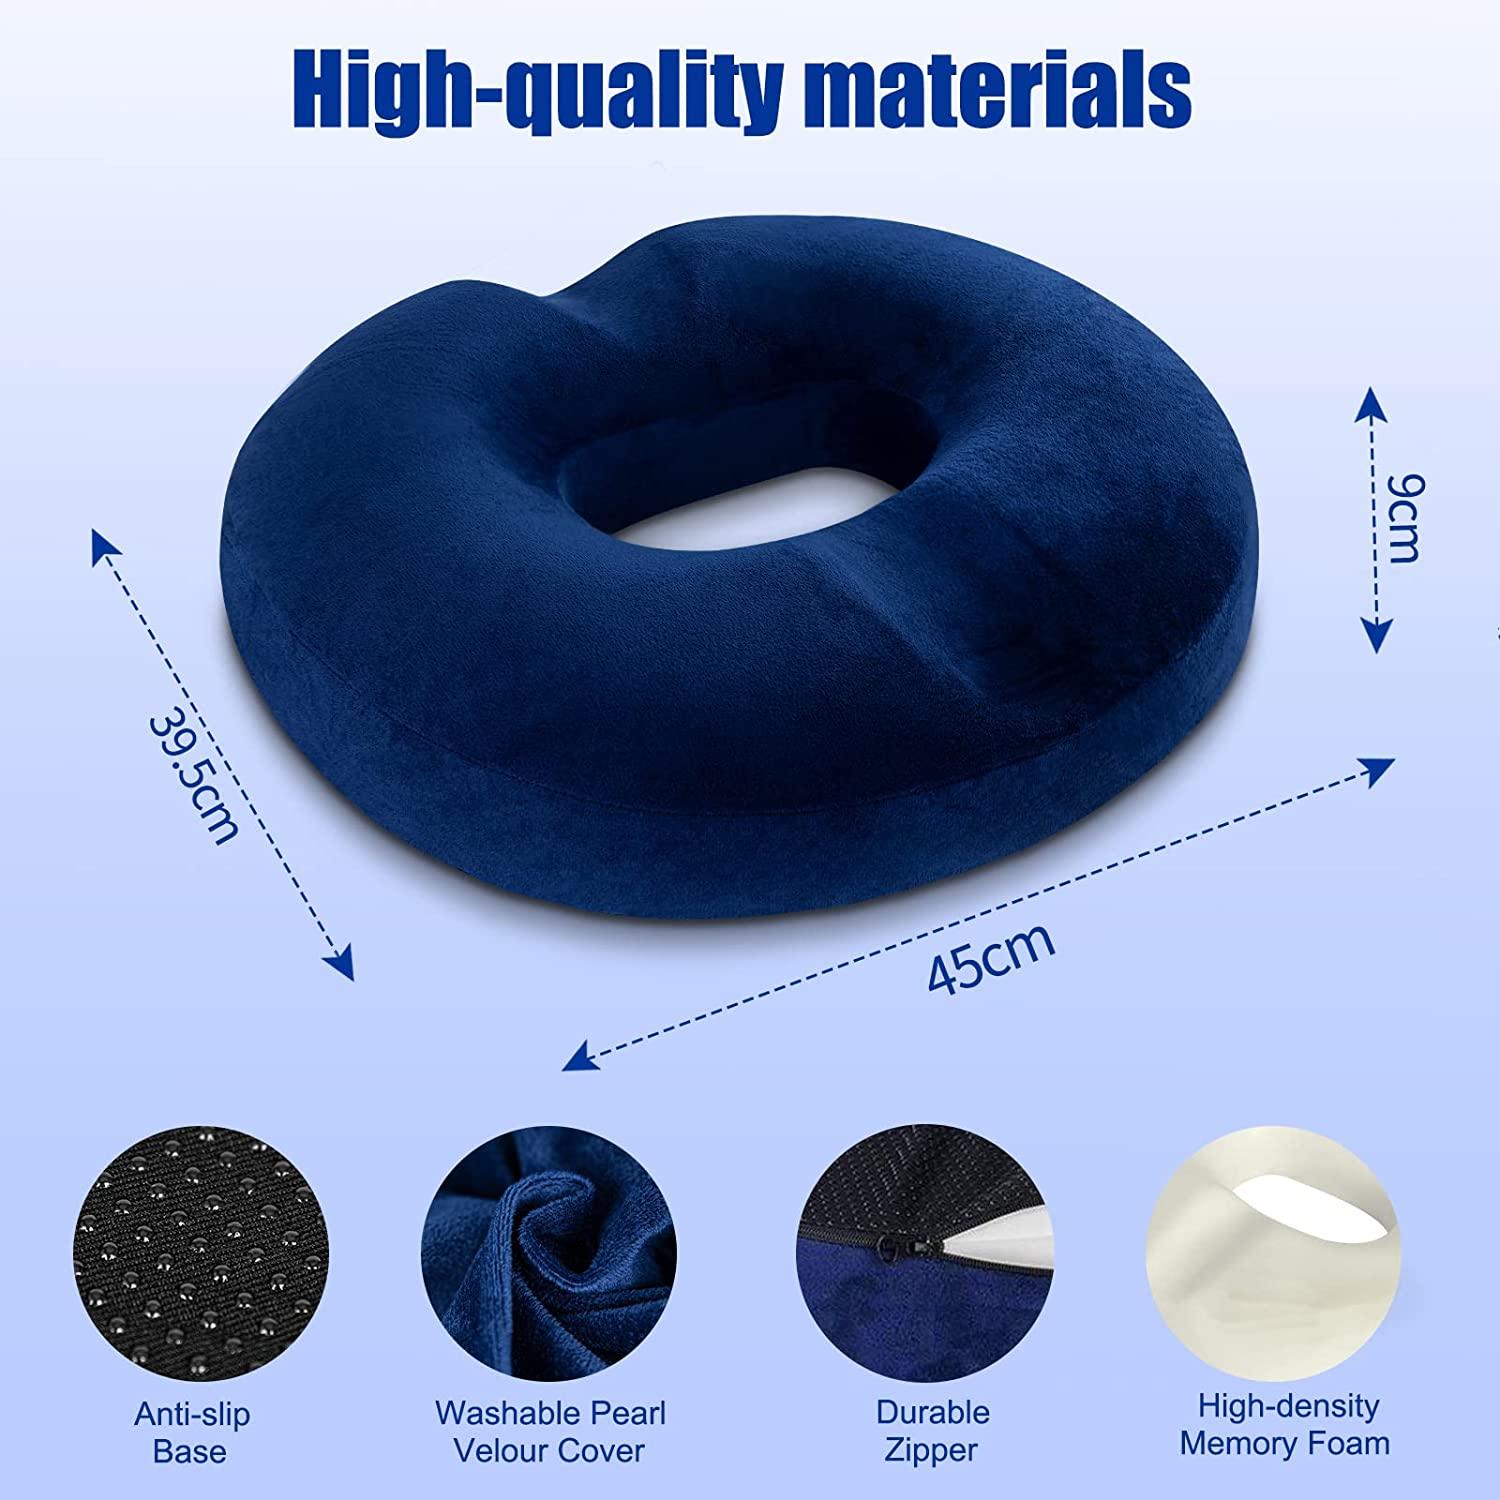 Donut Cushion Memory Foam Medical Ring Seat Pain Relief Orthopedic Pillow  Coccyx